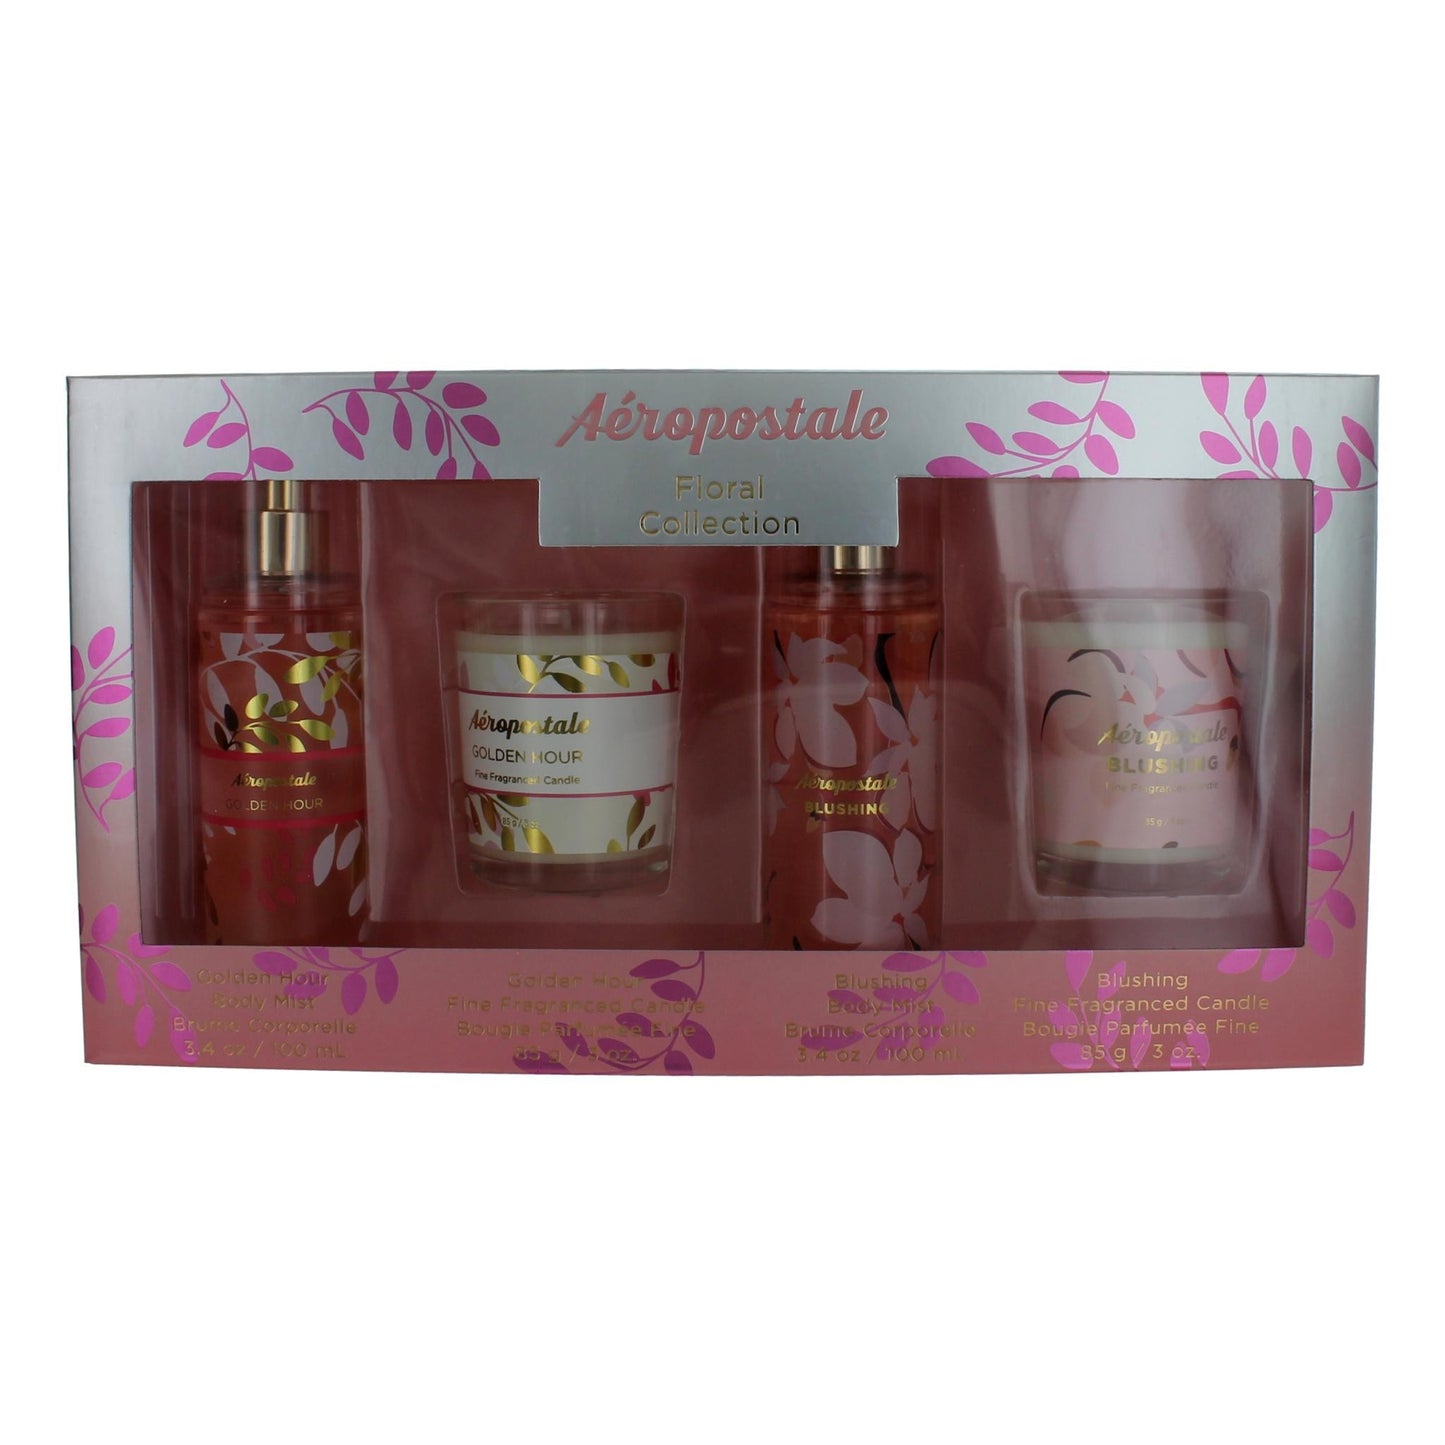 Bottle of Aeropostale Floral Collection by Aeropostale, 4 Piece Gift Set